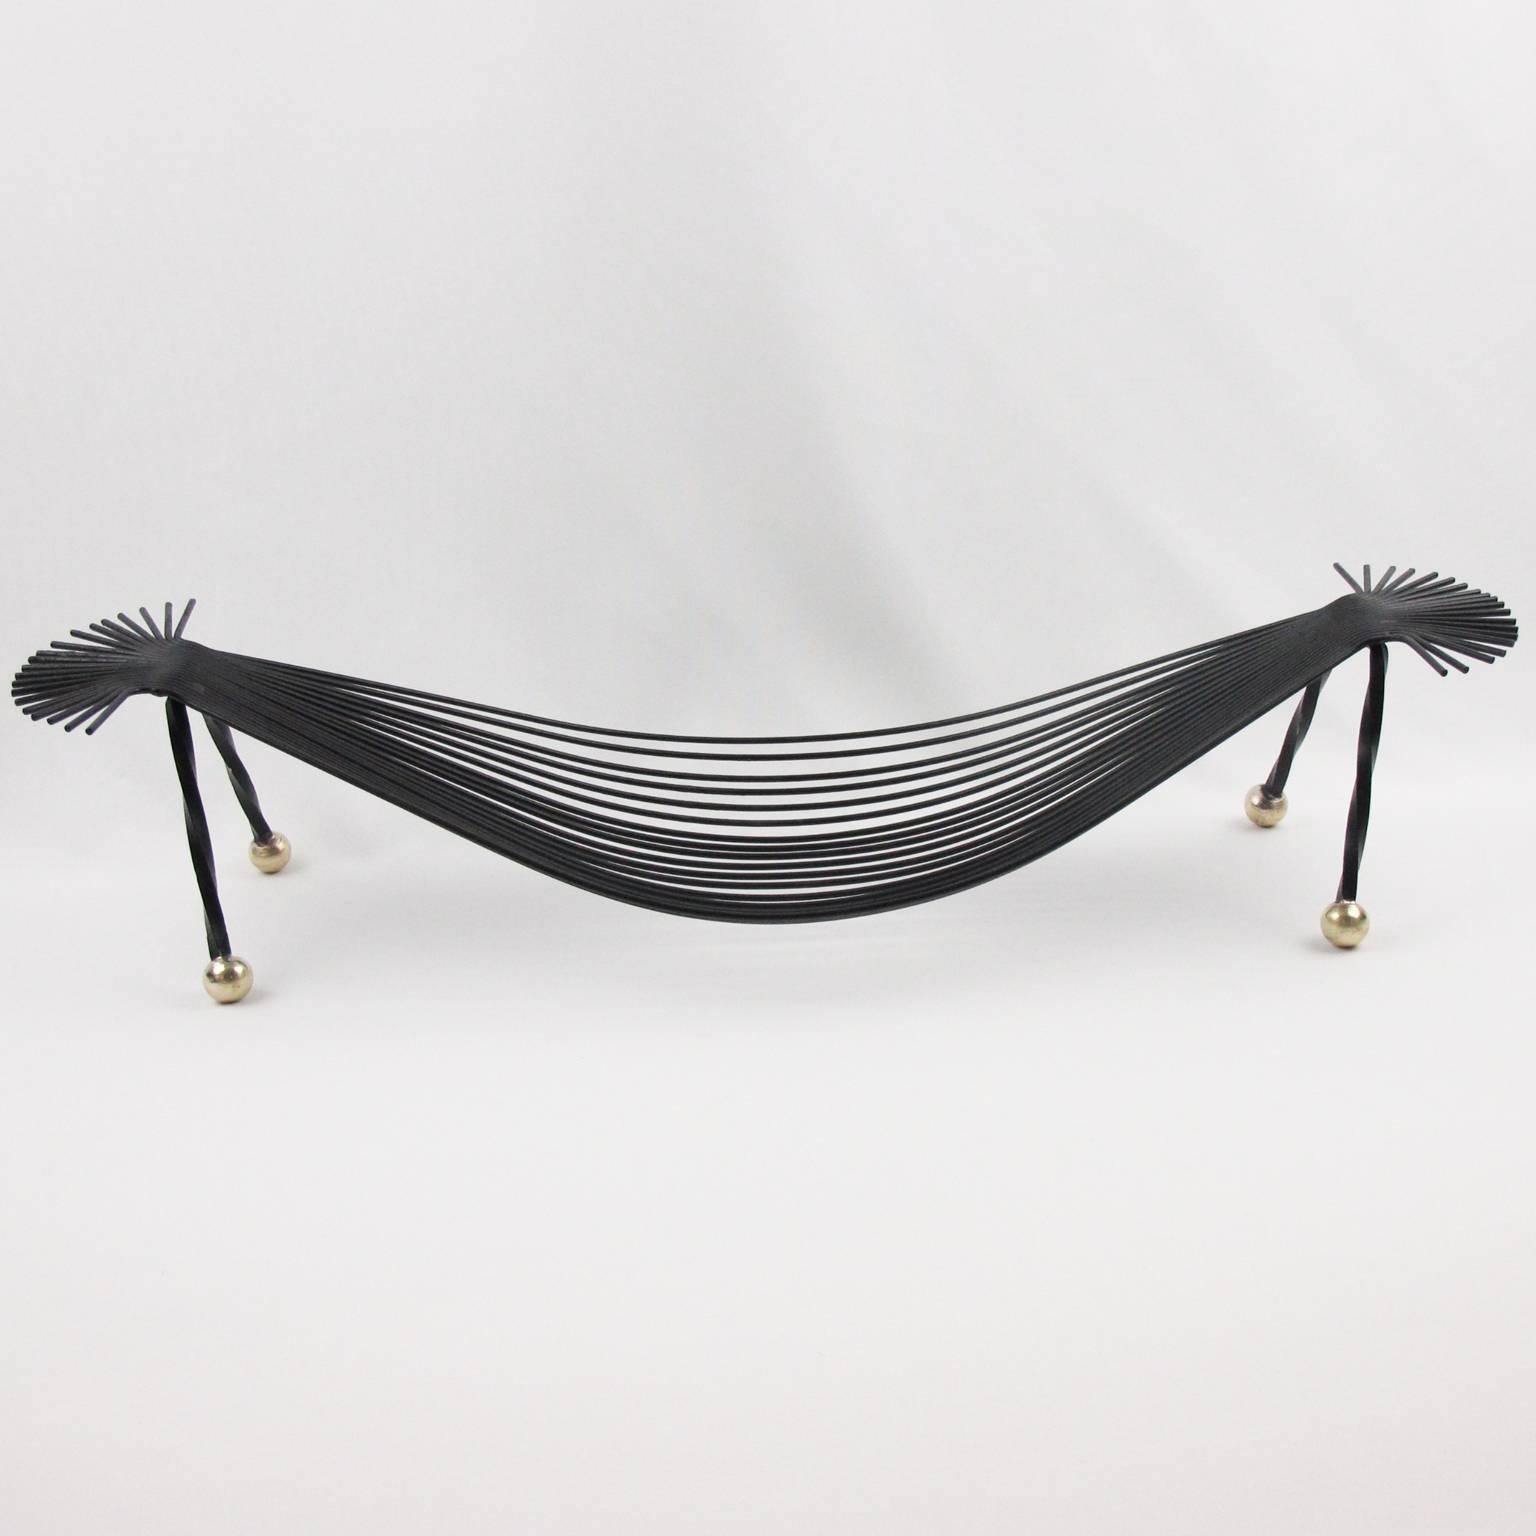 Stunning Mid-Century Modernist metal fruit bowl or basket, France, circa 1960s. Original black paint patina with polished brass bead feet. Elongated hammock shape with thin metal rods. No visible marking. Excellent vintage